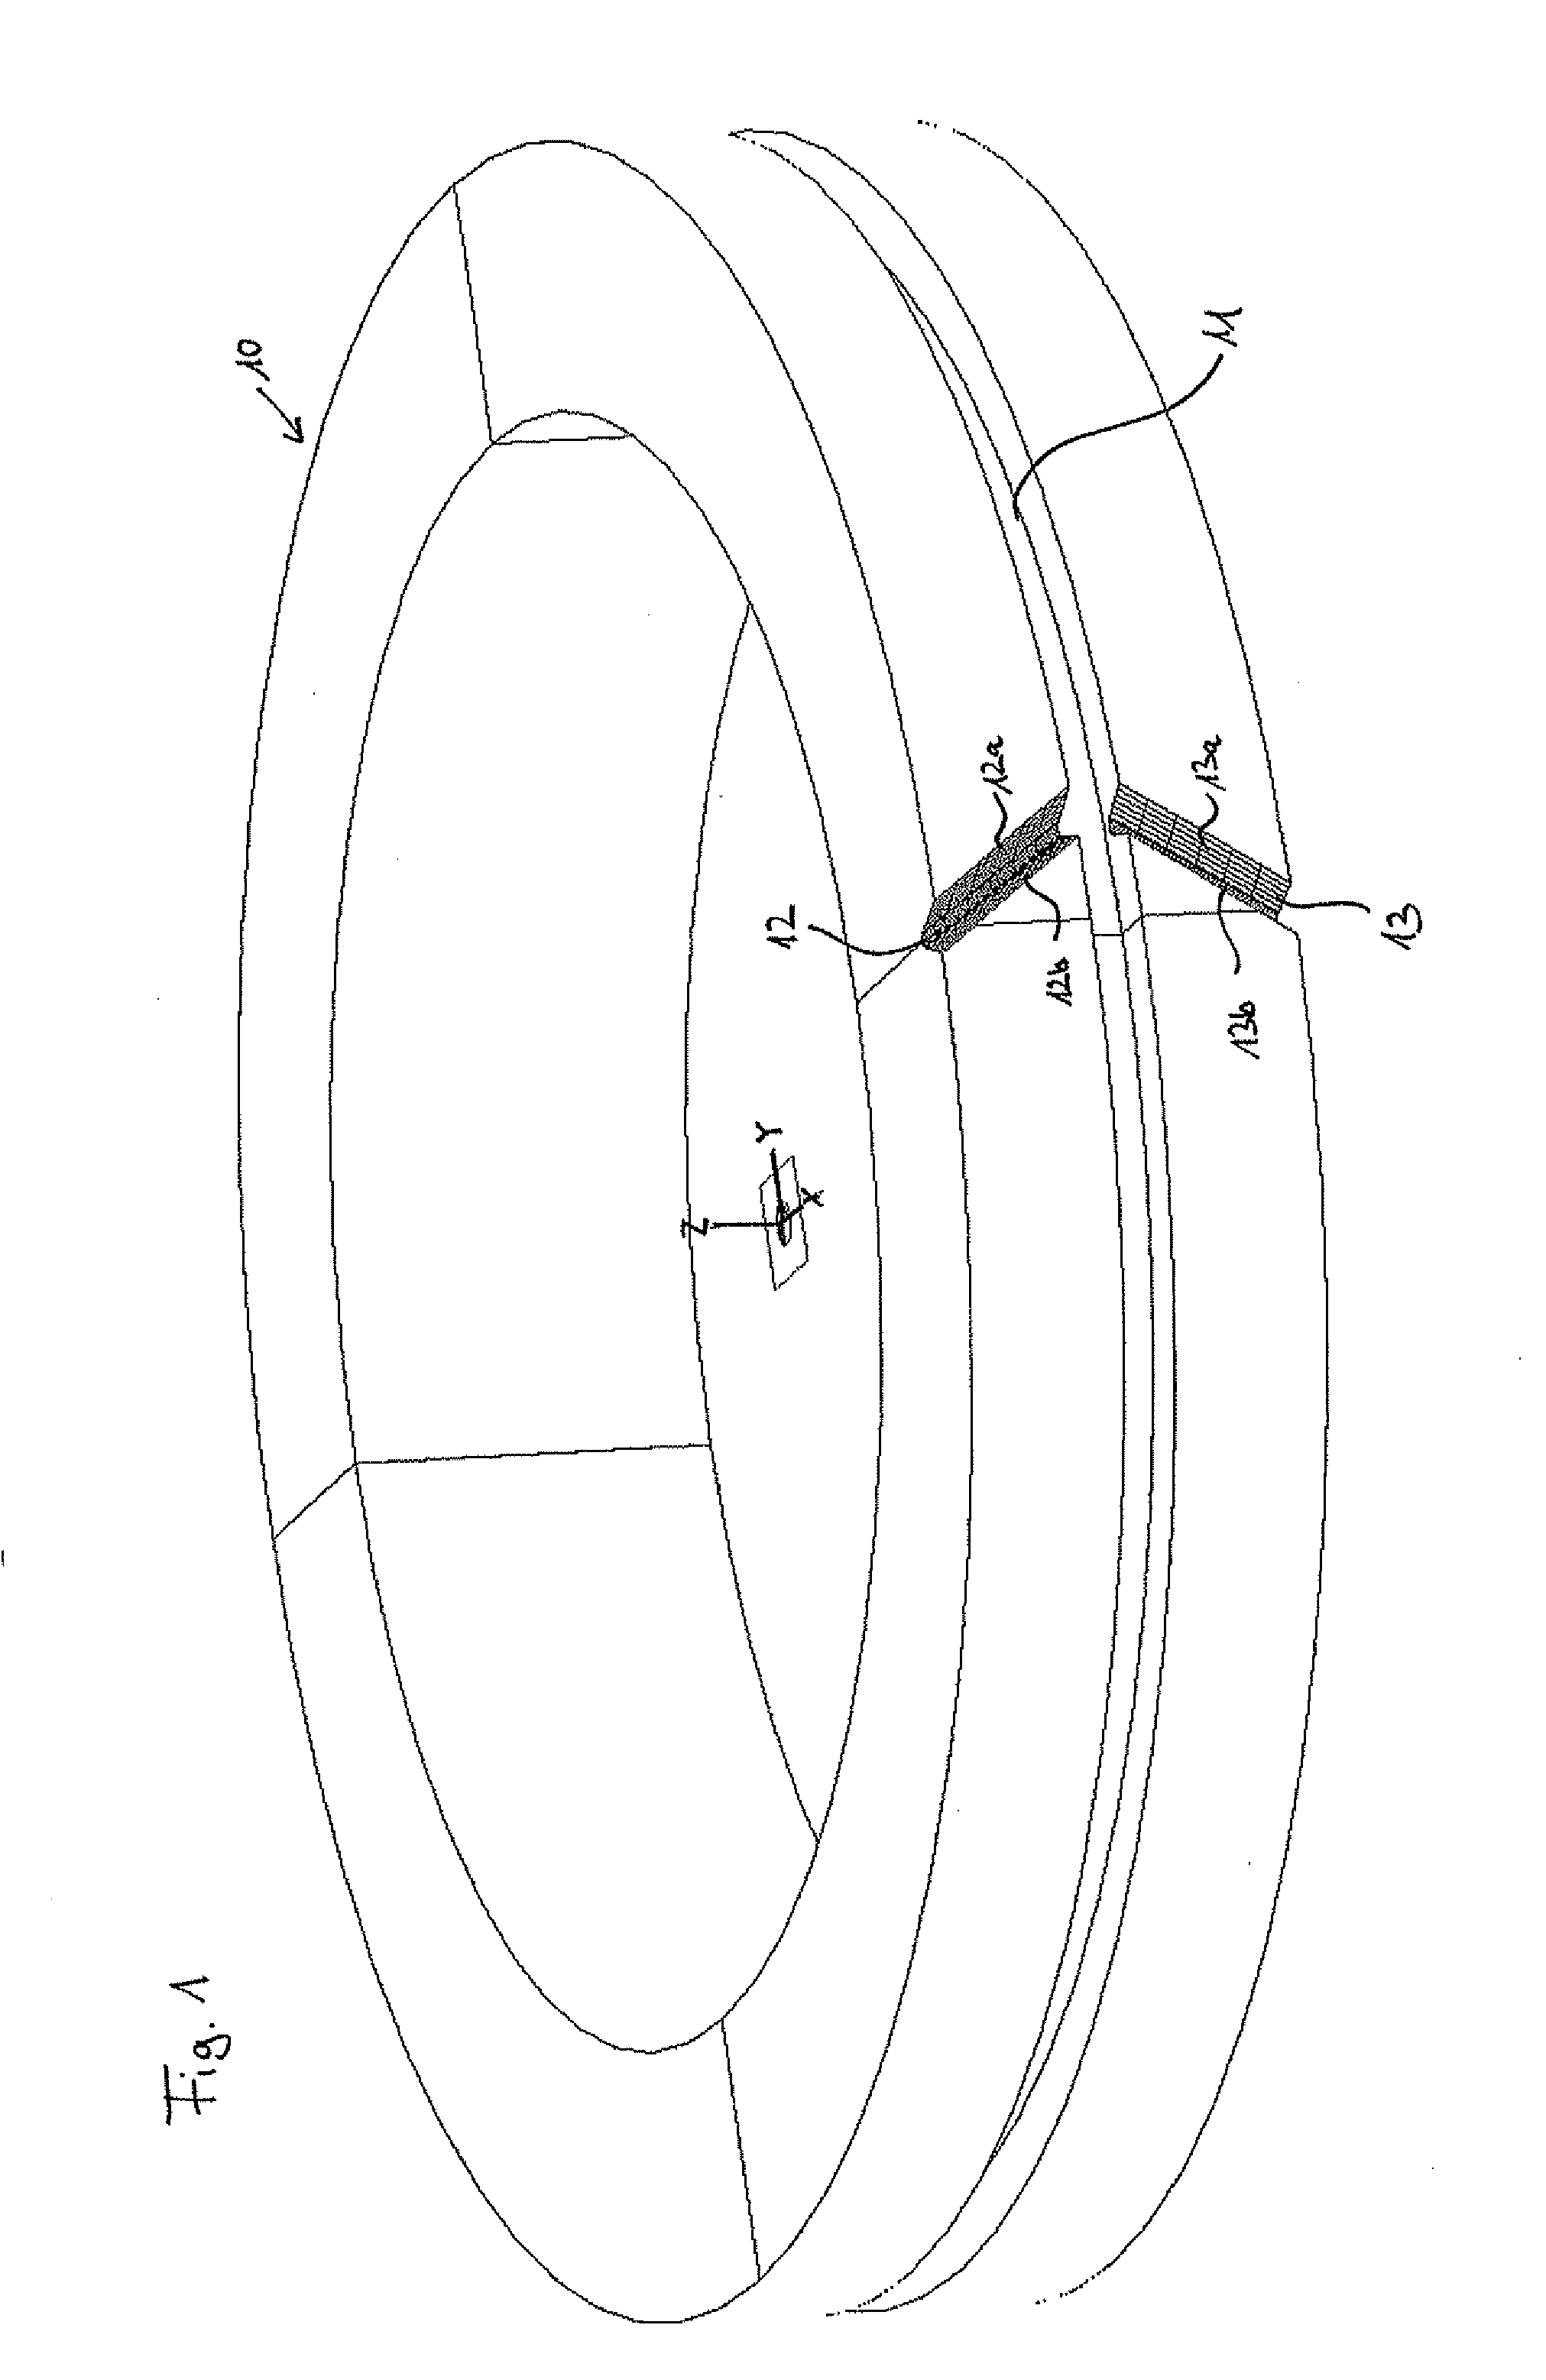 Process for producing a toothed wheel having a herringbone gearing and a process and an apparatus for generating control data to form a herringbone gearing on a workpiece.